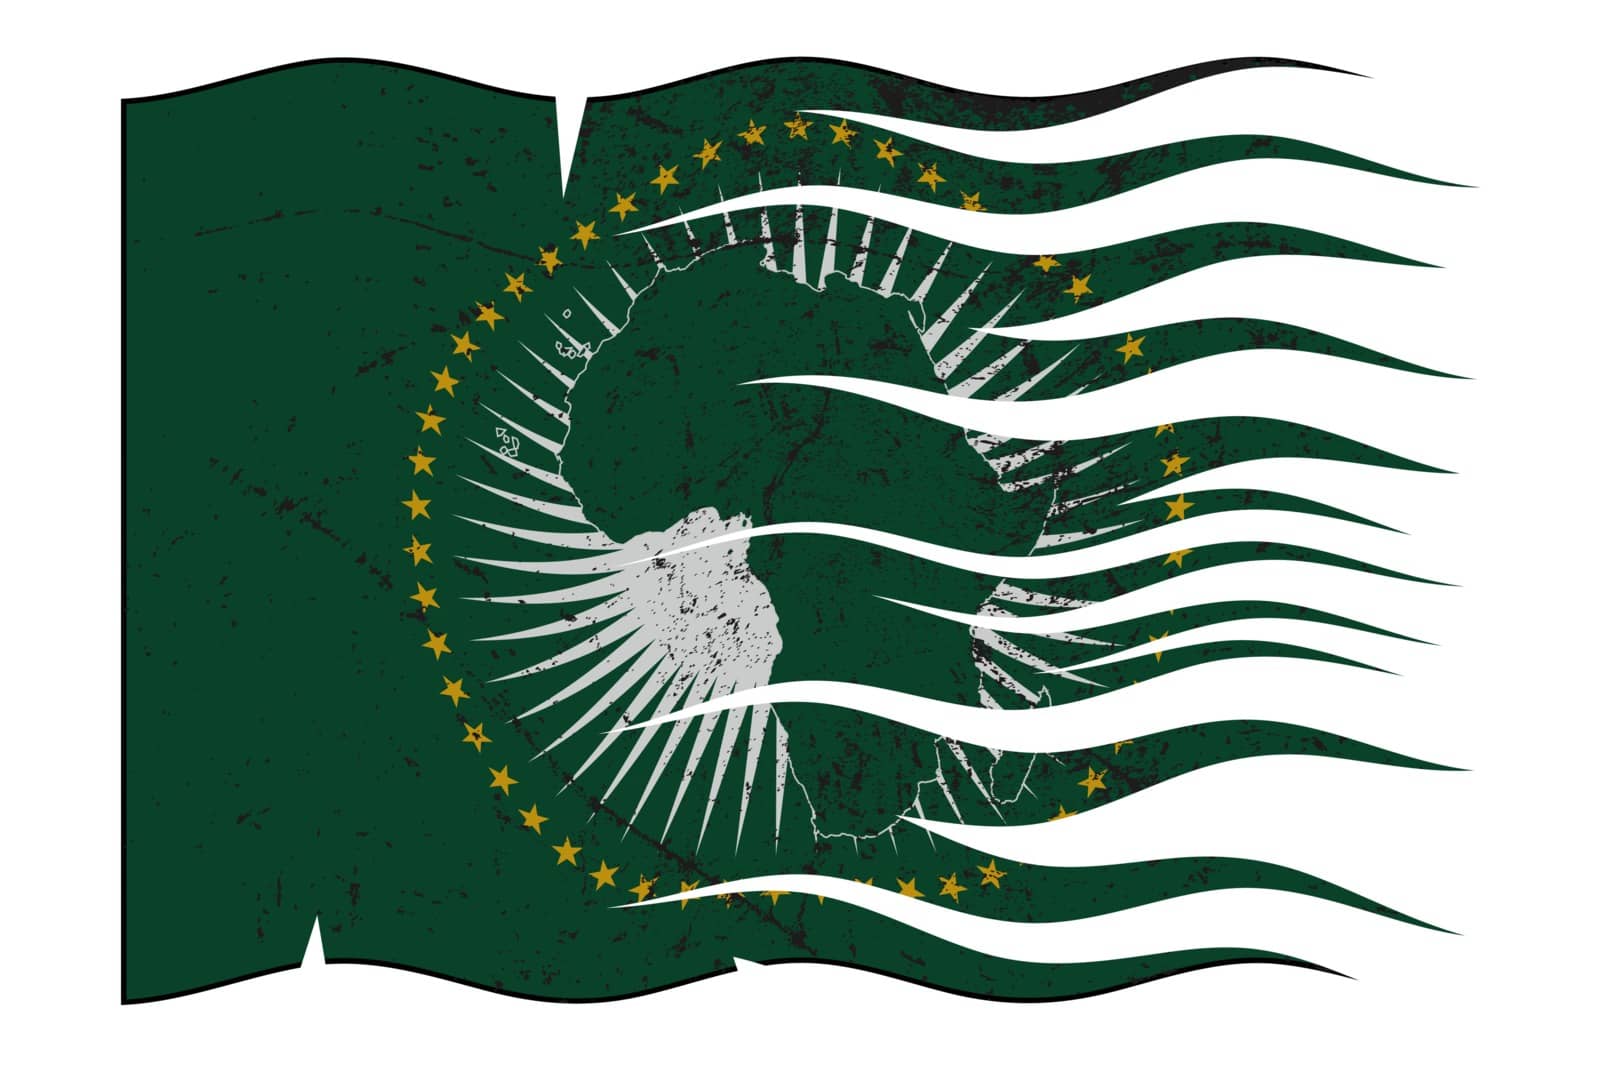 A wavy and grunged African Union flag design isolated on a white background